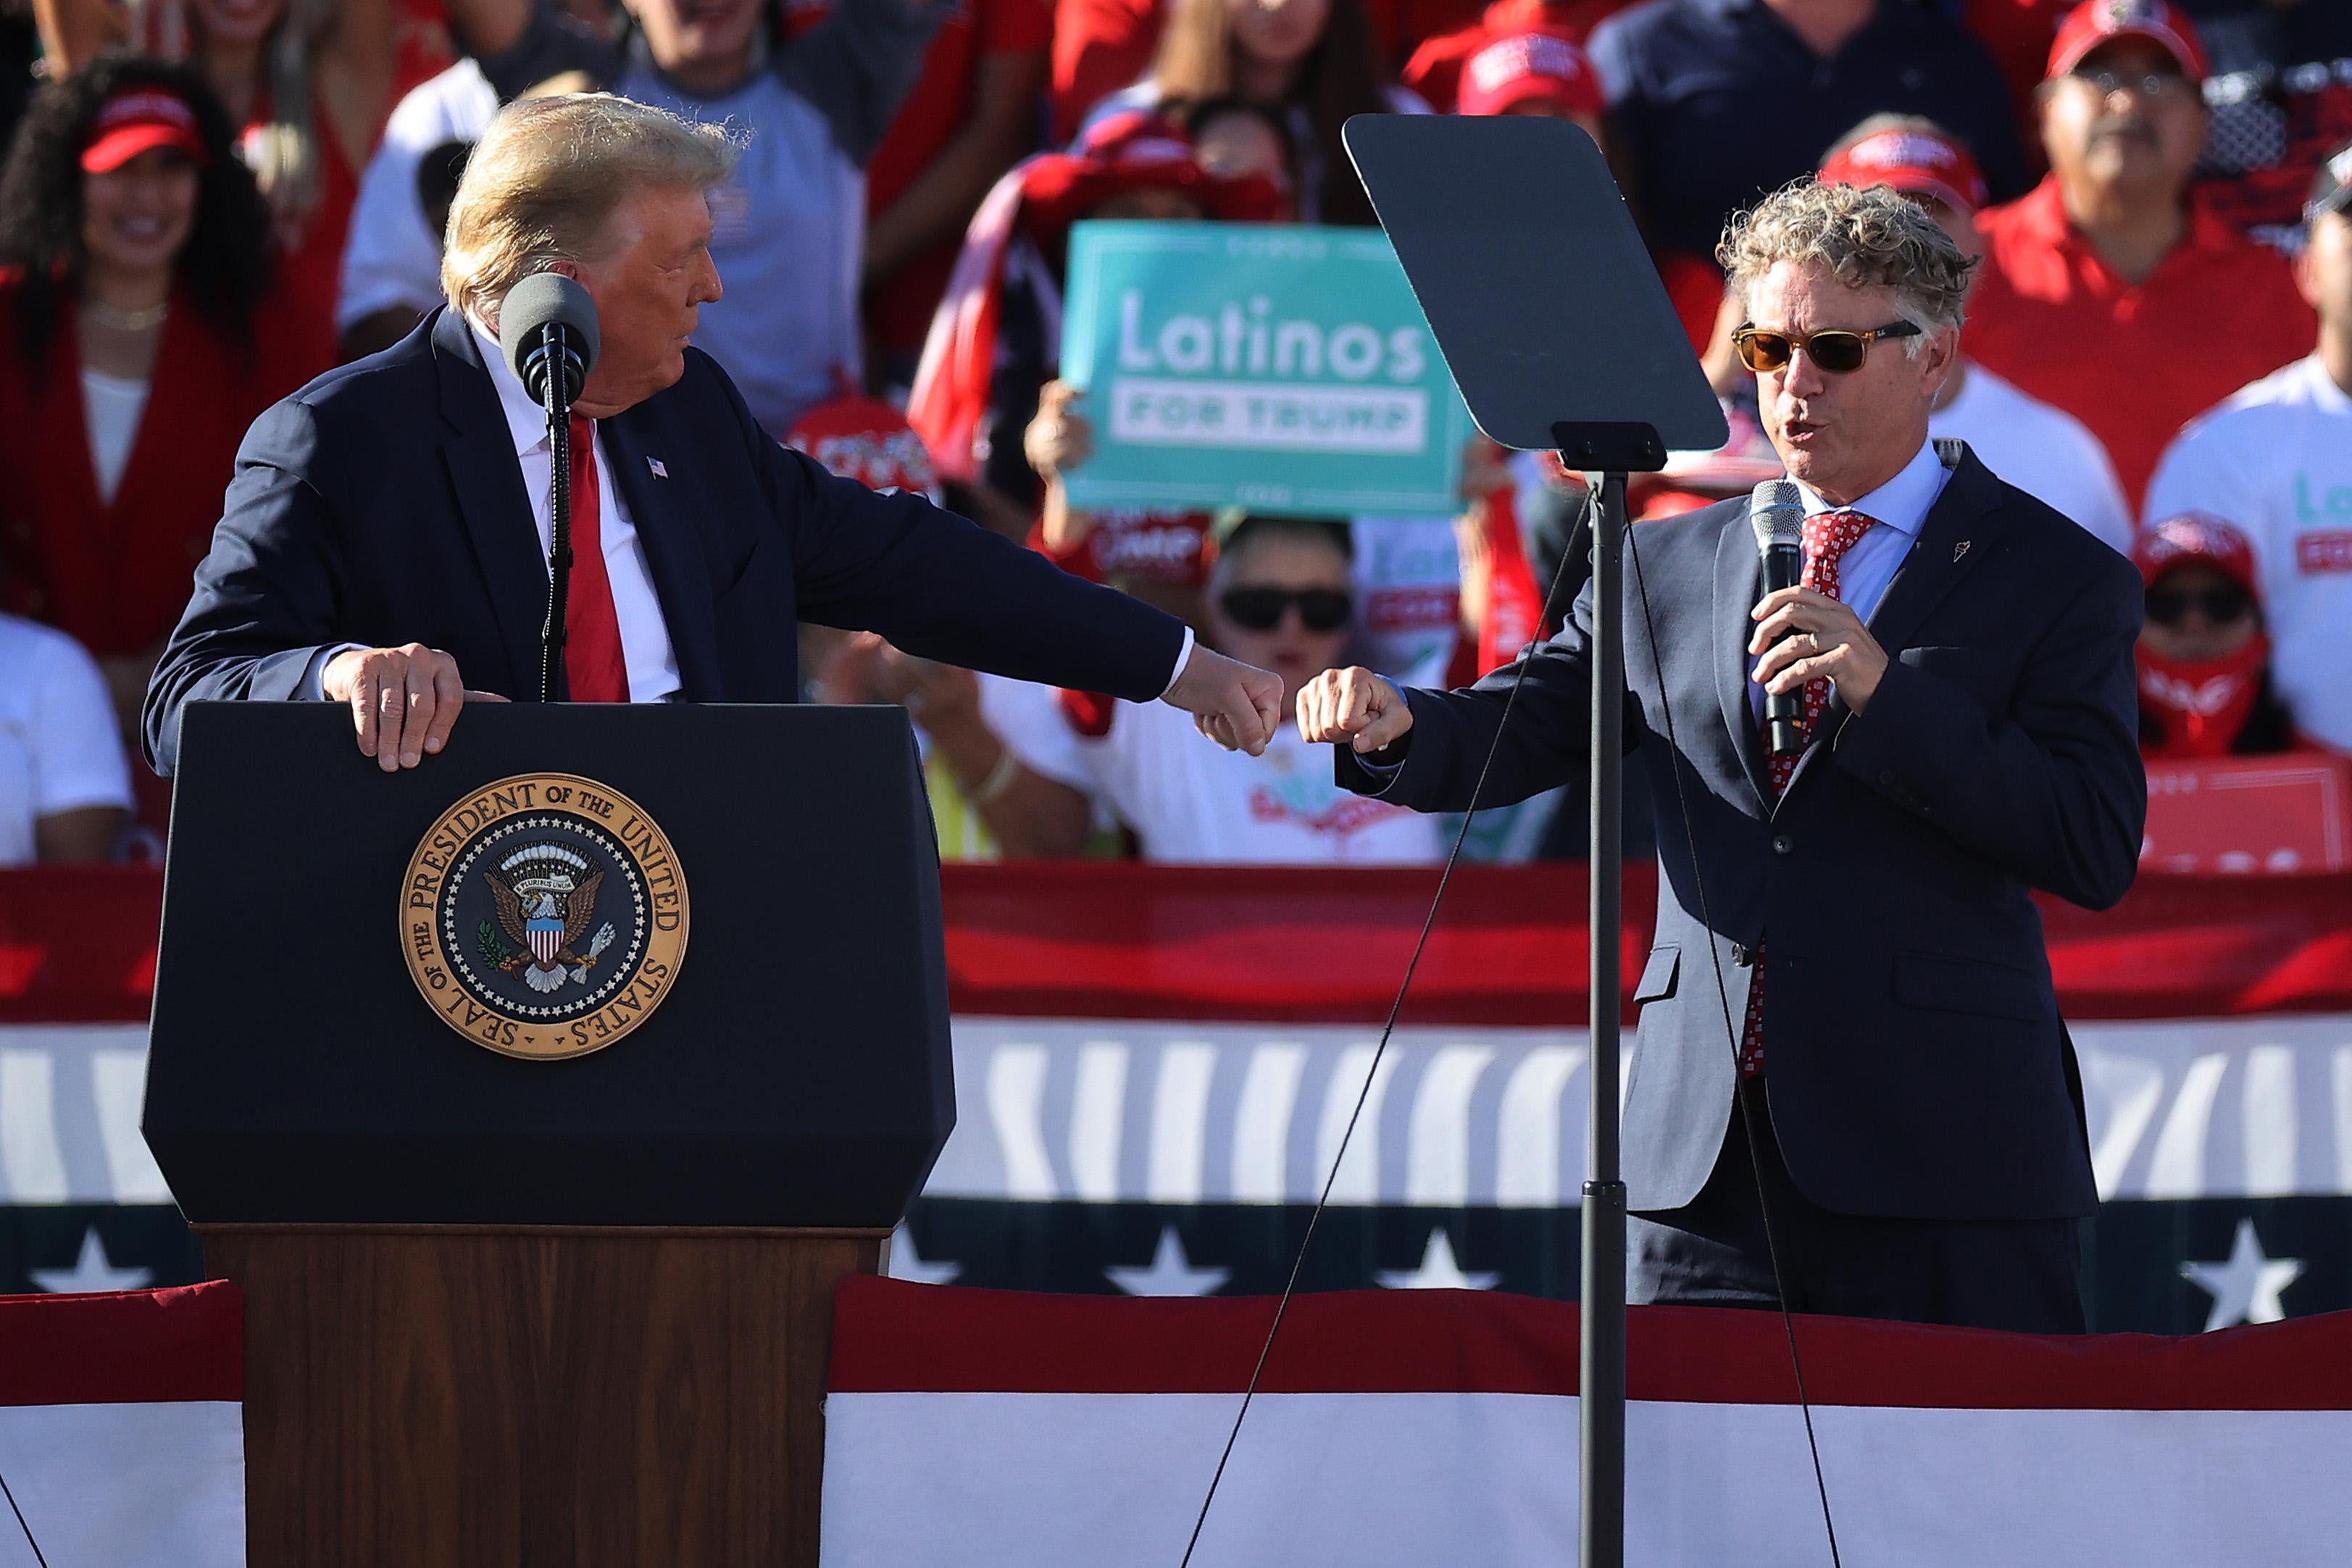 Trump, gripping his podium, fist-bumps Rand Paul as they both stand onstage surrounded by American flag bunting, with a crowd behind them